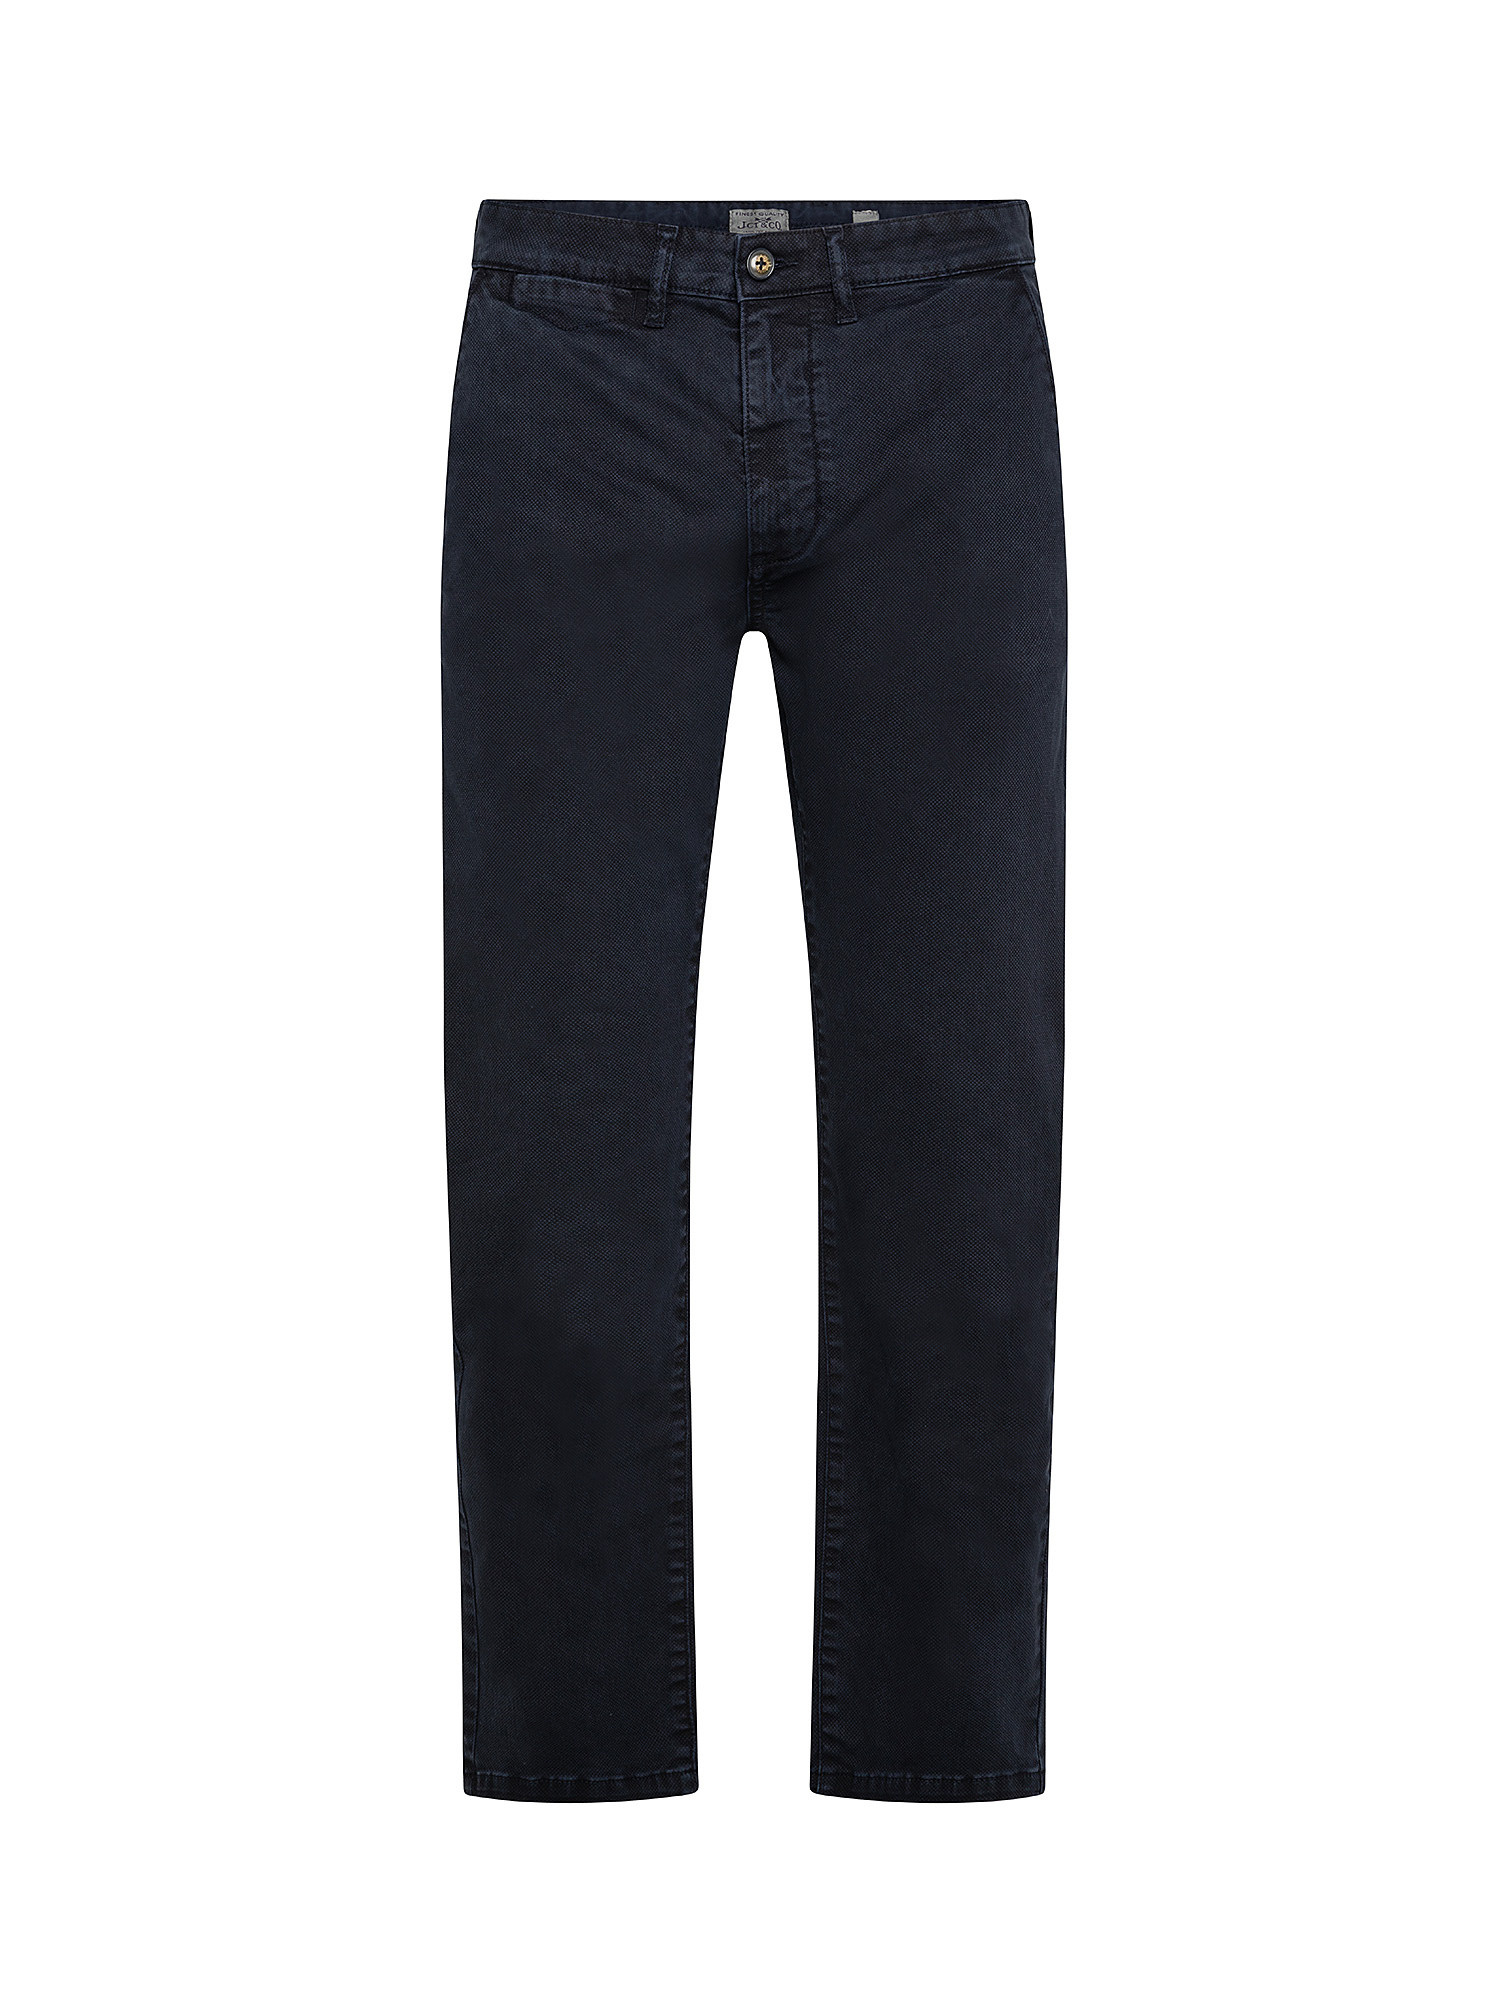 Pantalone chinos in cotone stretch, Blu scuro, large image number 0